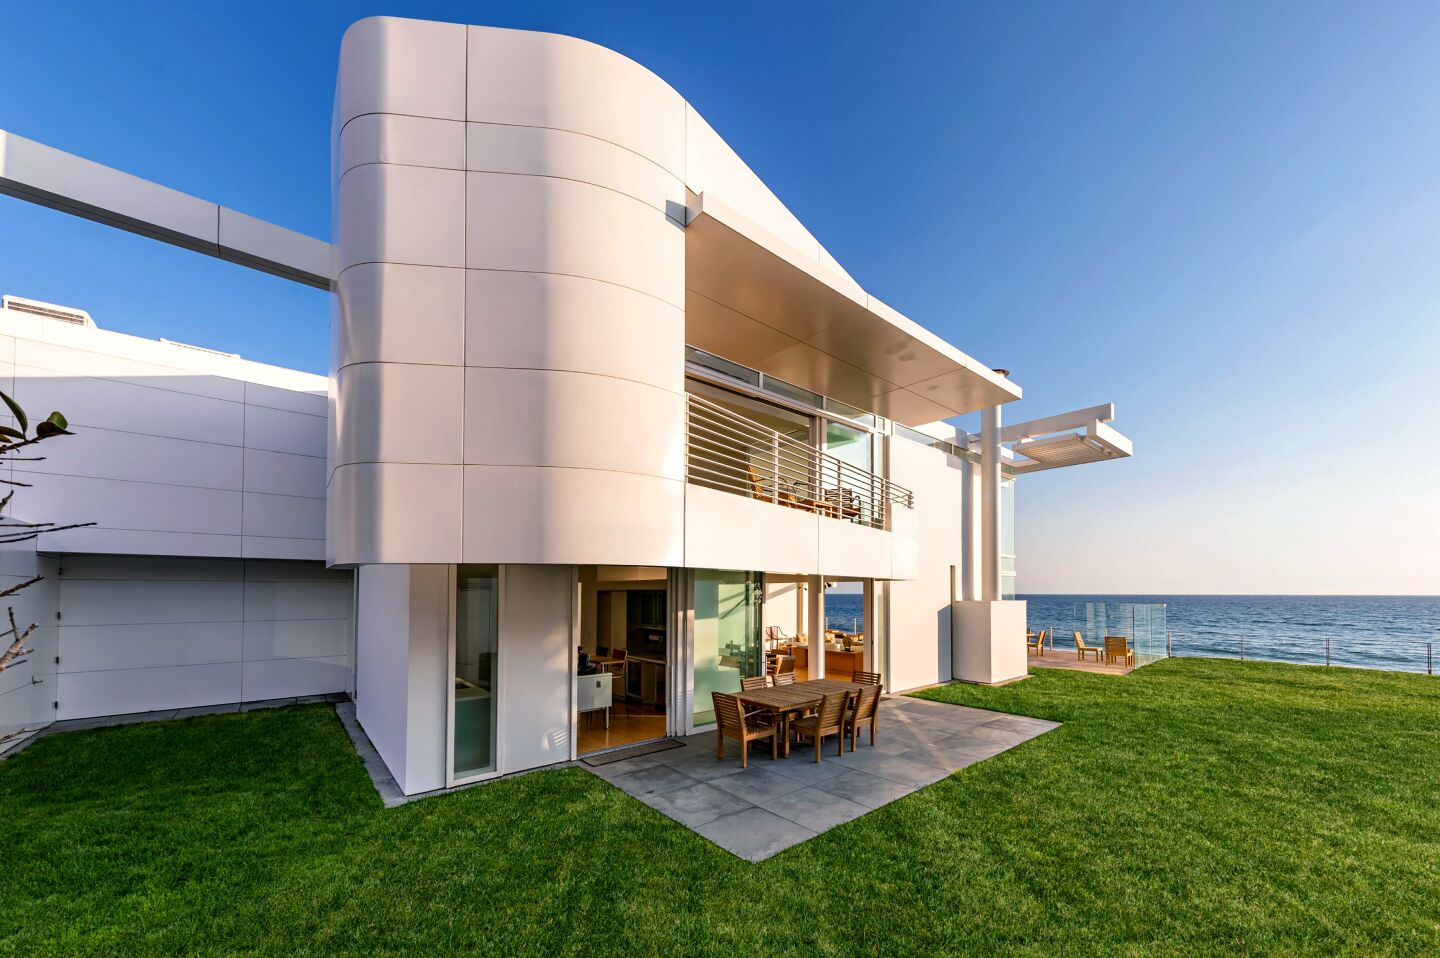 White aluminum panels and frosted glass wrap the exterior of Eli Broad's Malibu home.